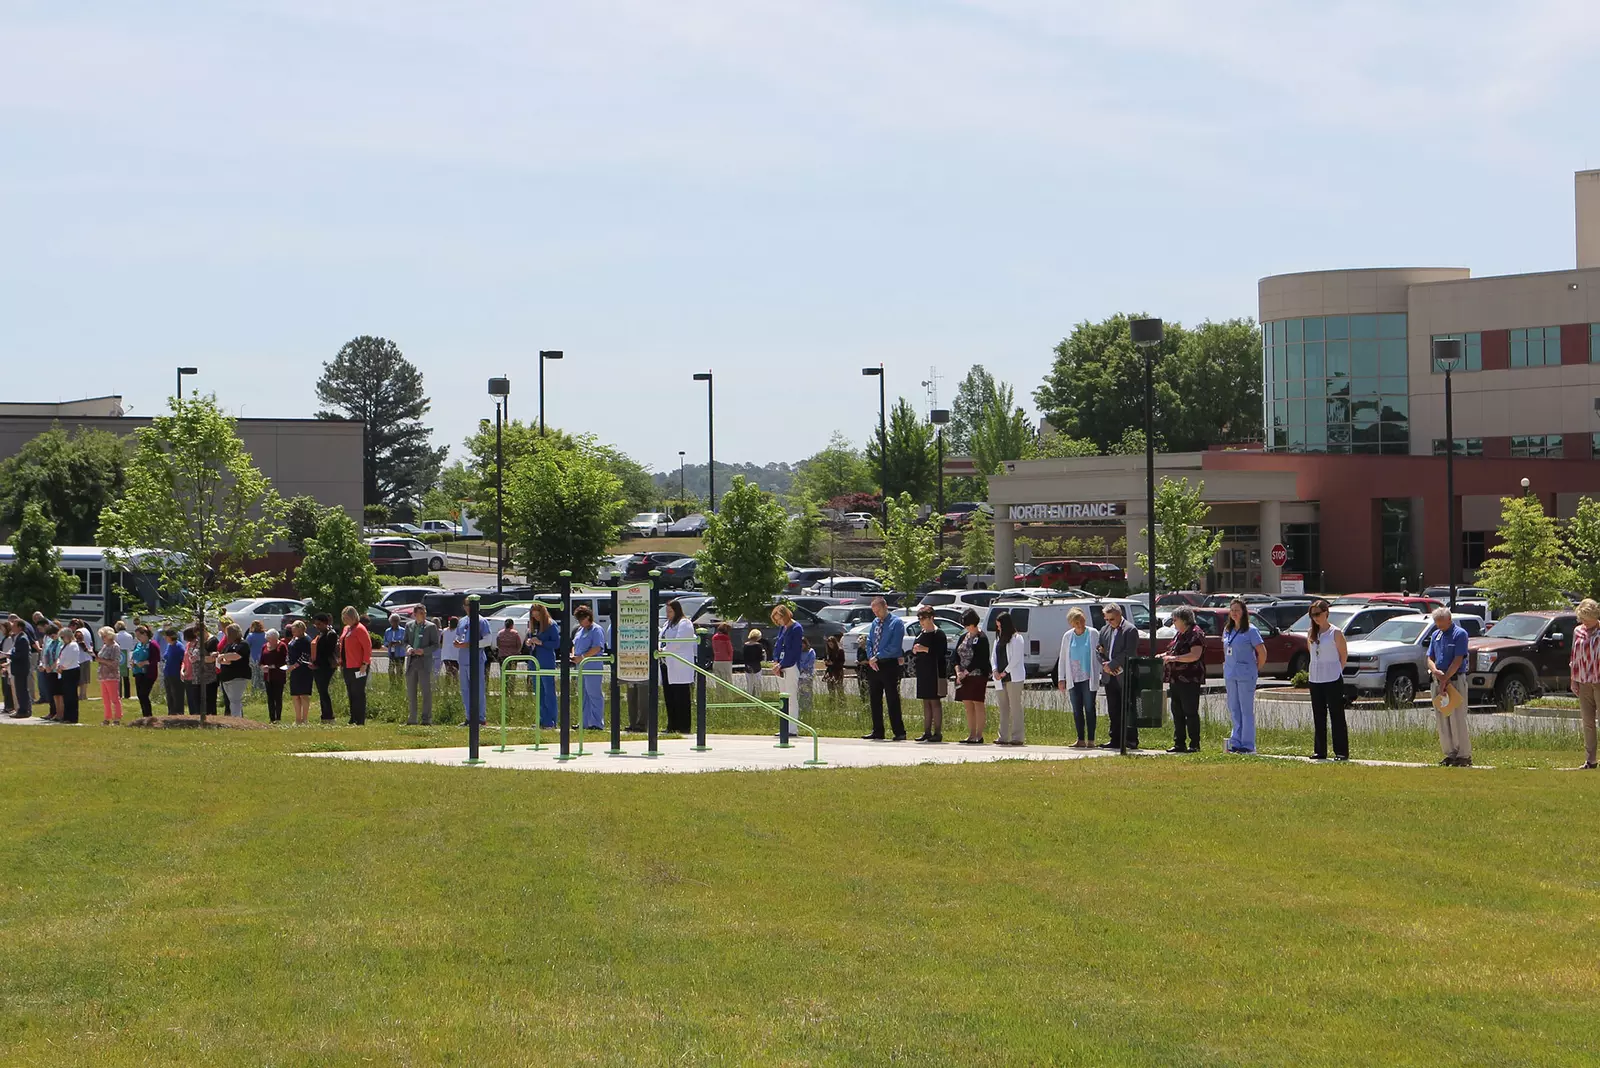 AdventHealth staff are gathered outside of a hospital praying.